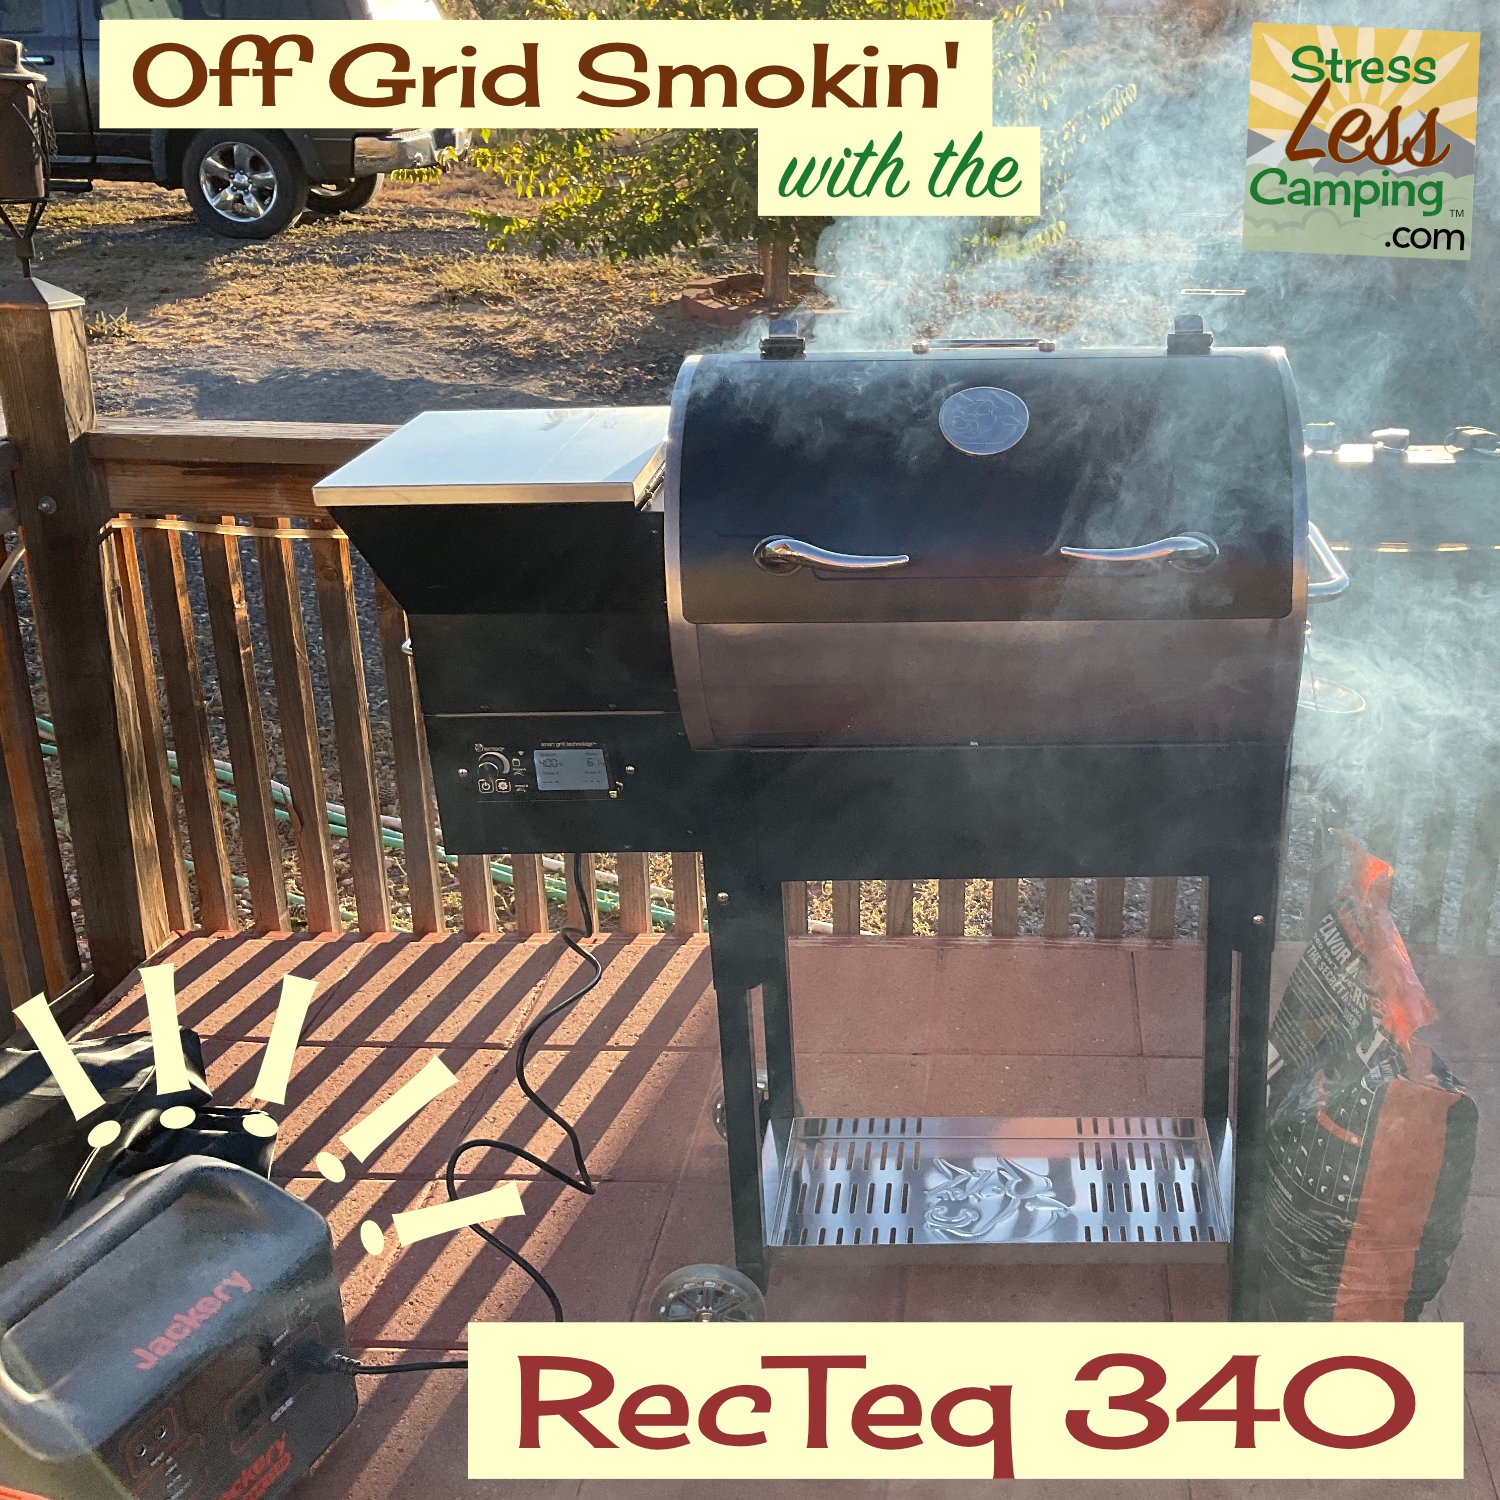 RecTeq 340 smoker review for off-grid RV camping and boondocking -  StressLess Camping